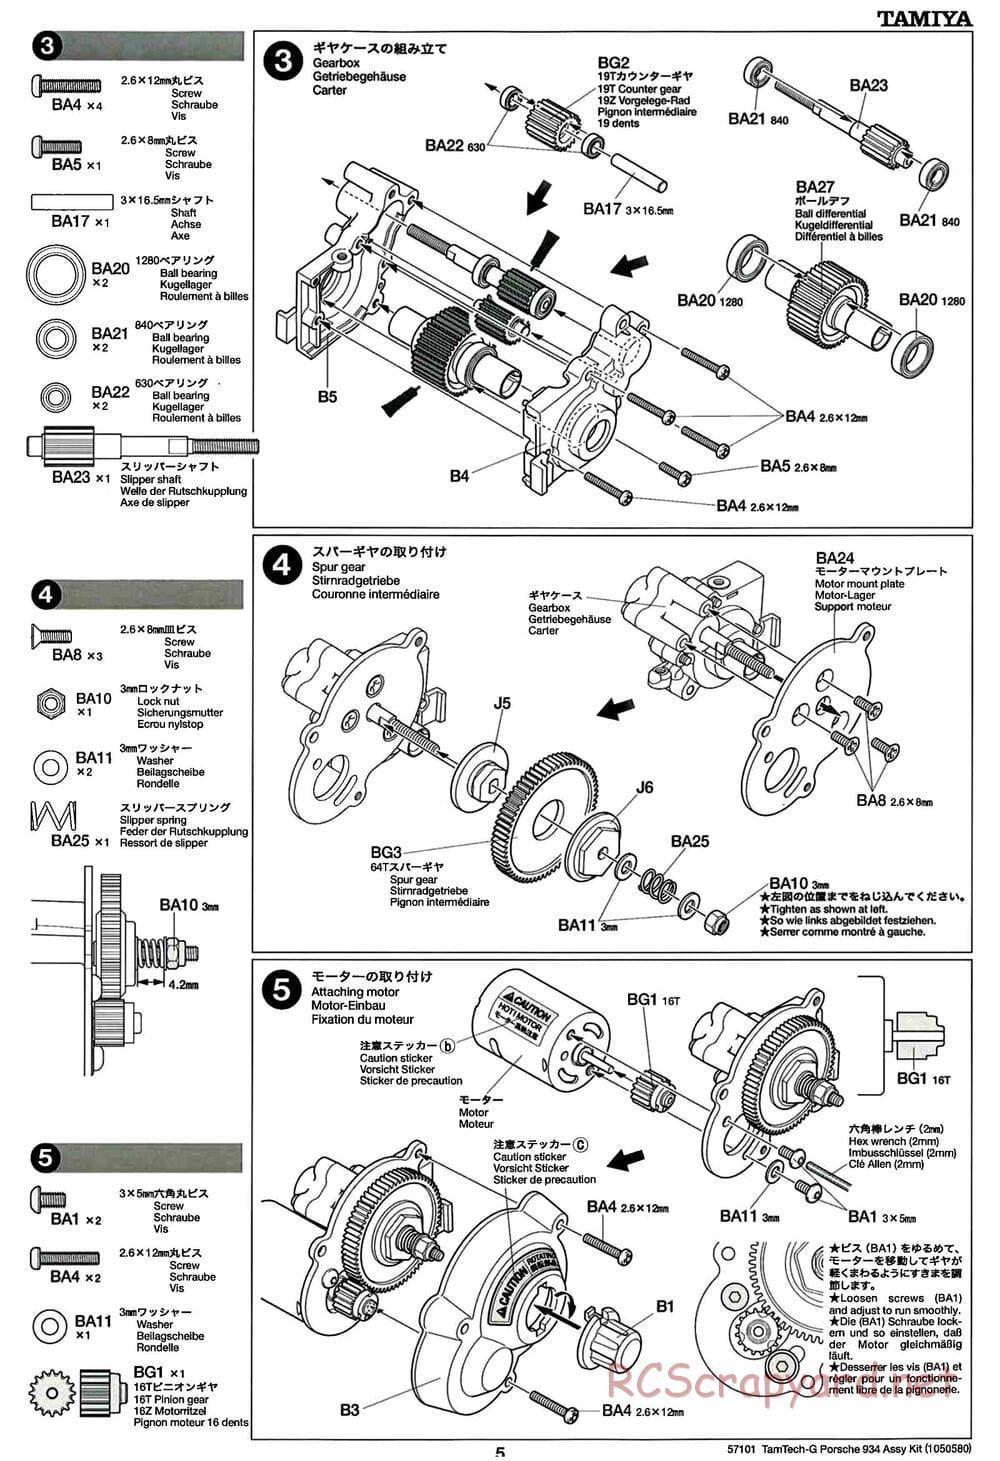 Tamiya - Porsche Turbo RSR - GT-01 Chassis - Manual - Page 5